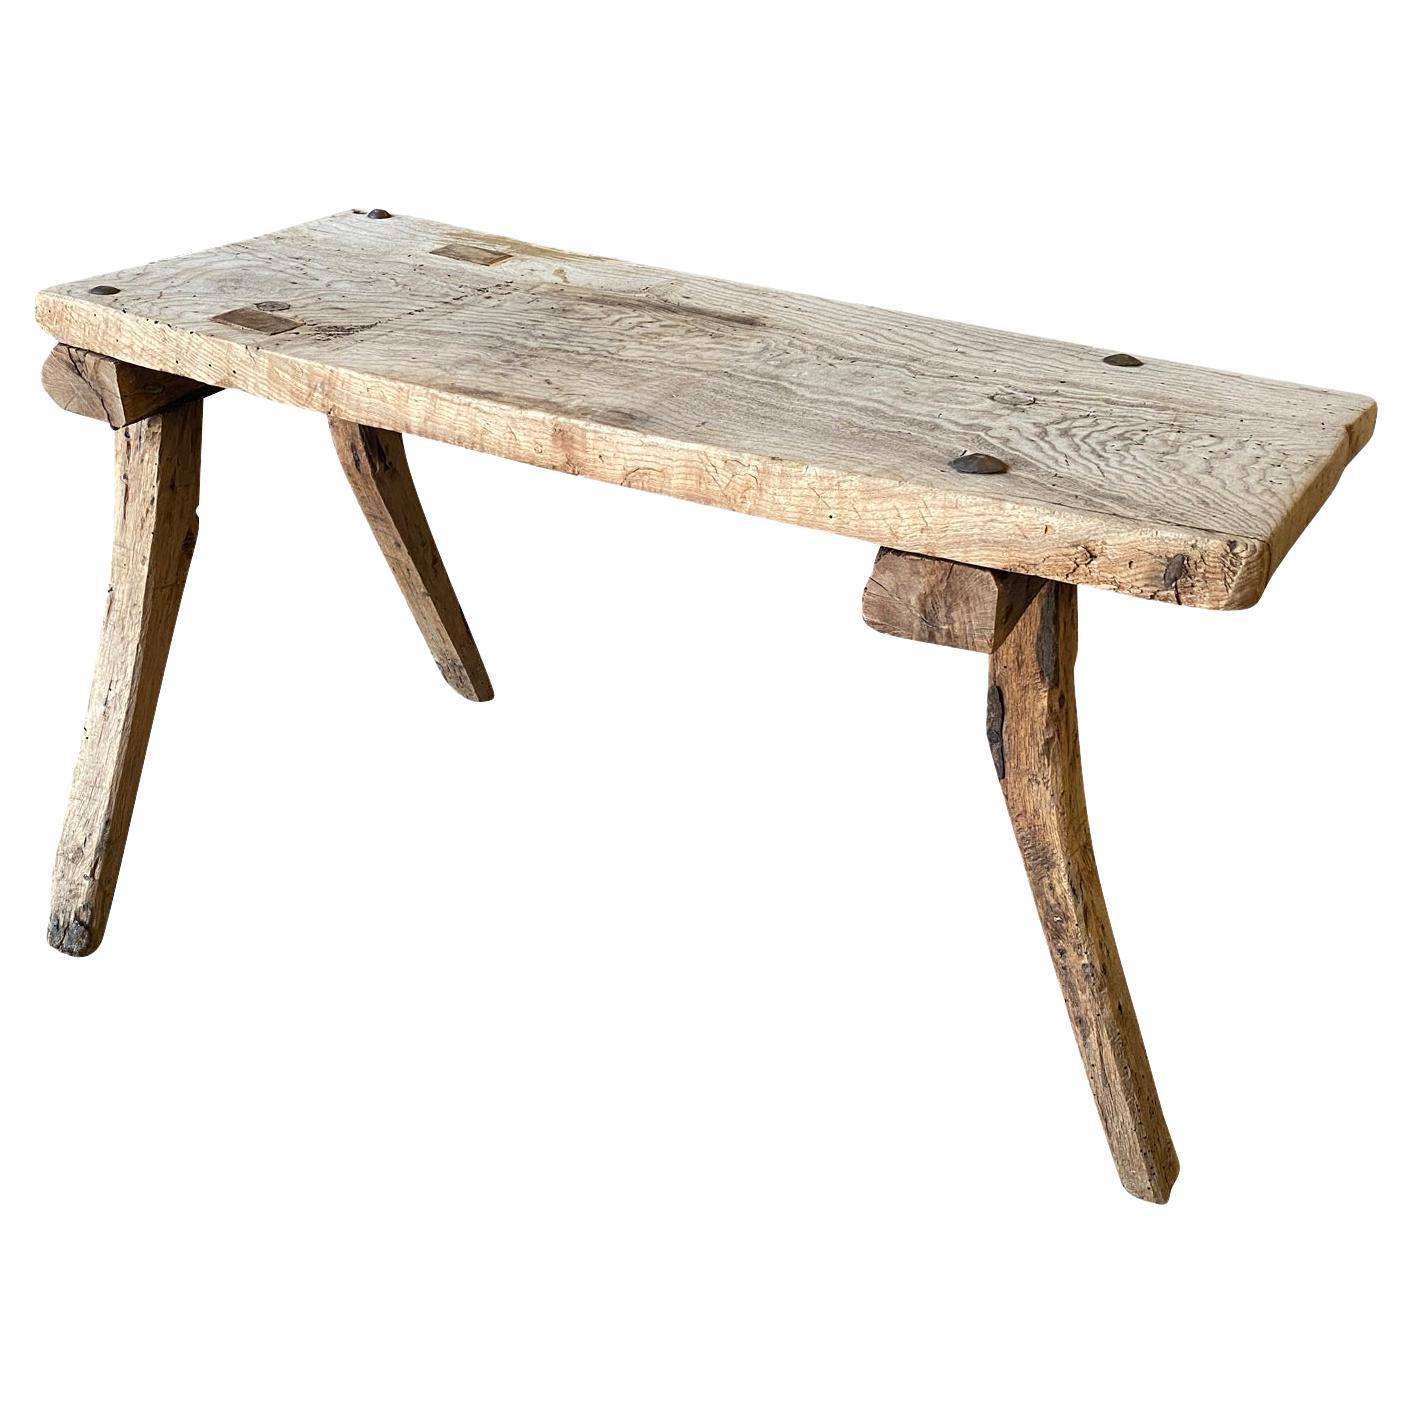 Spanish Early 19th Century Rustic Console, Work Table